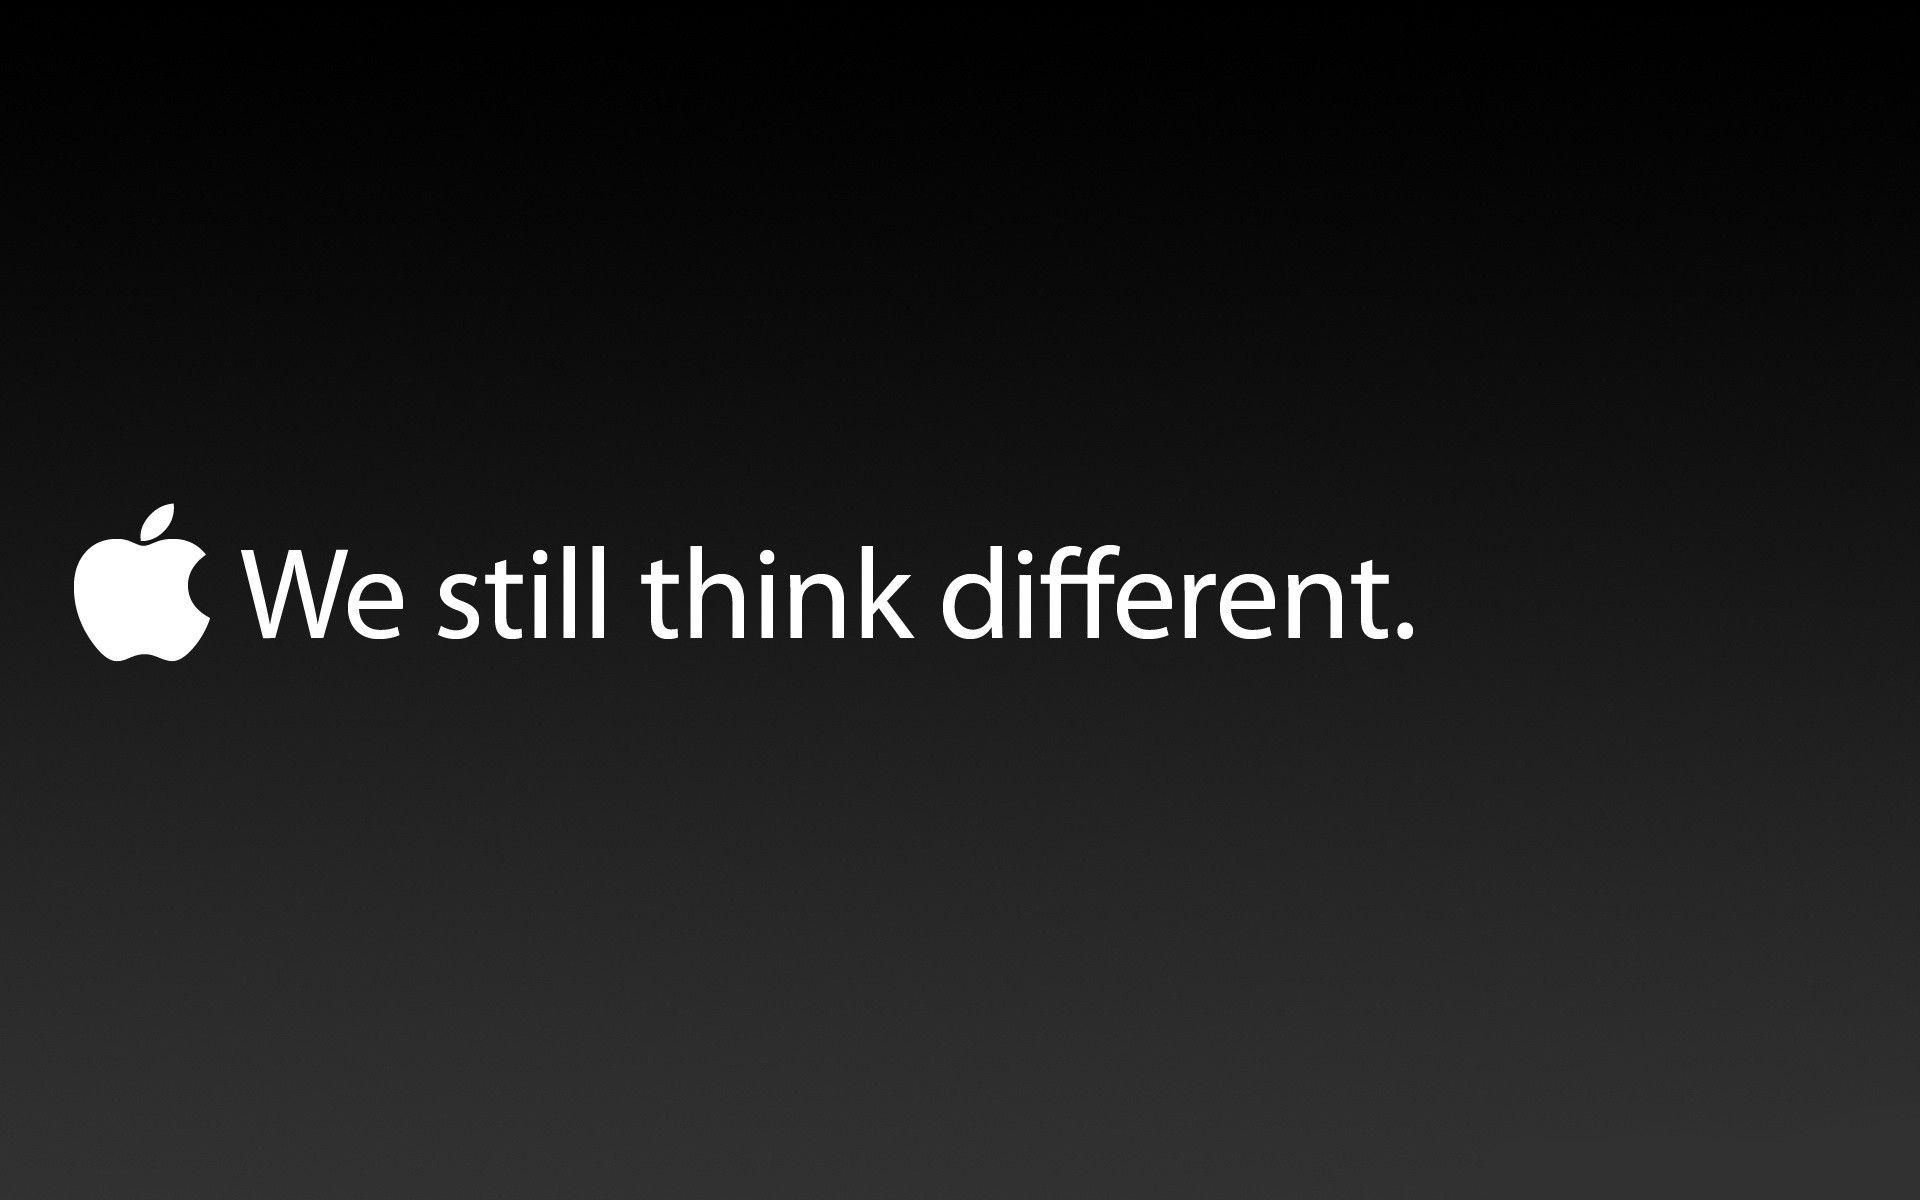 They think different. Desktop wallpaper for free